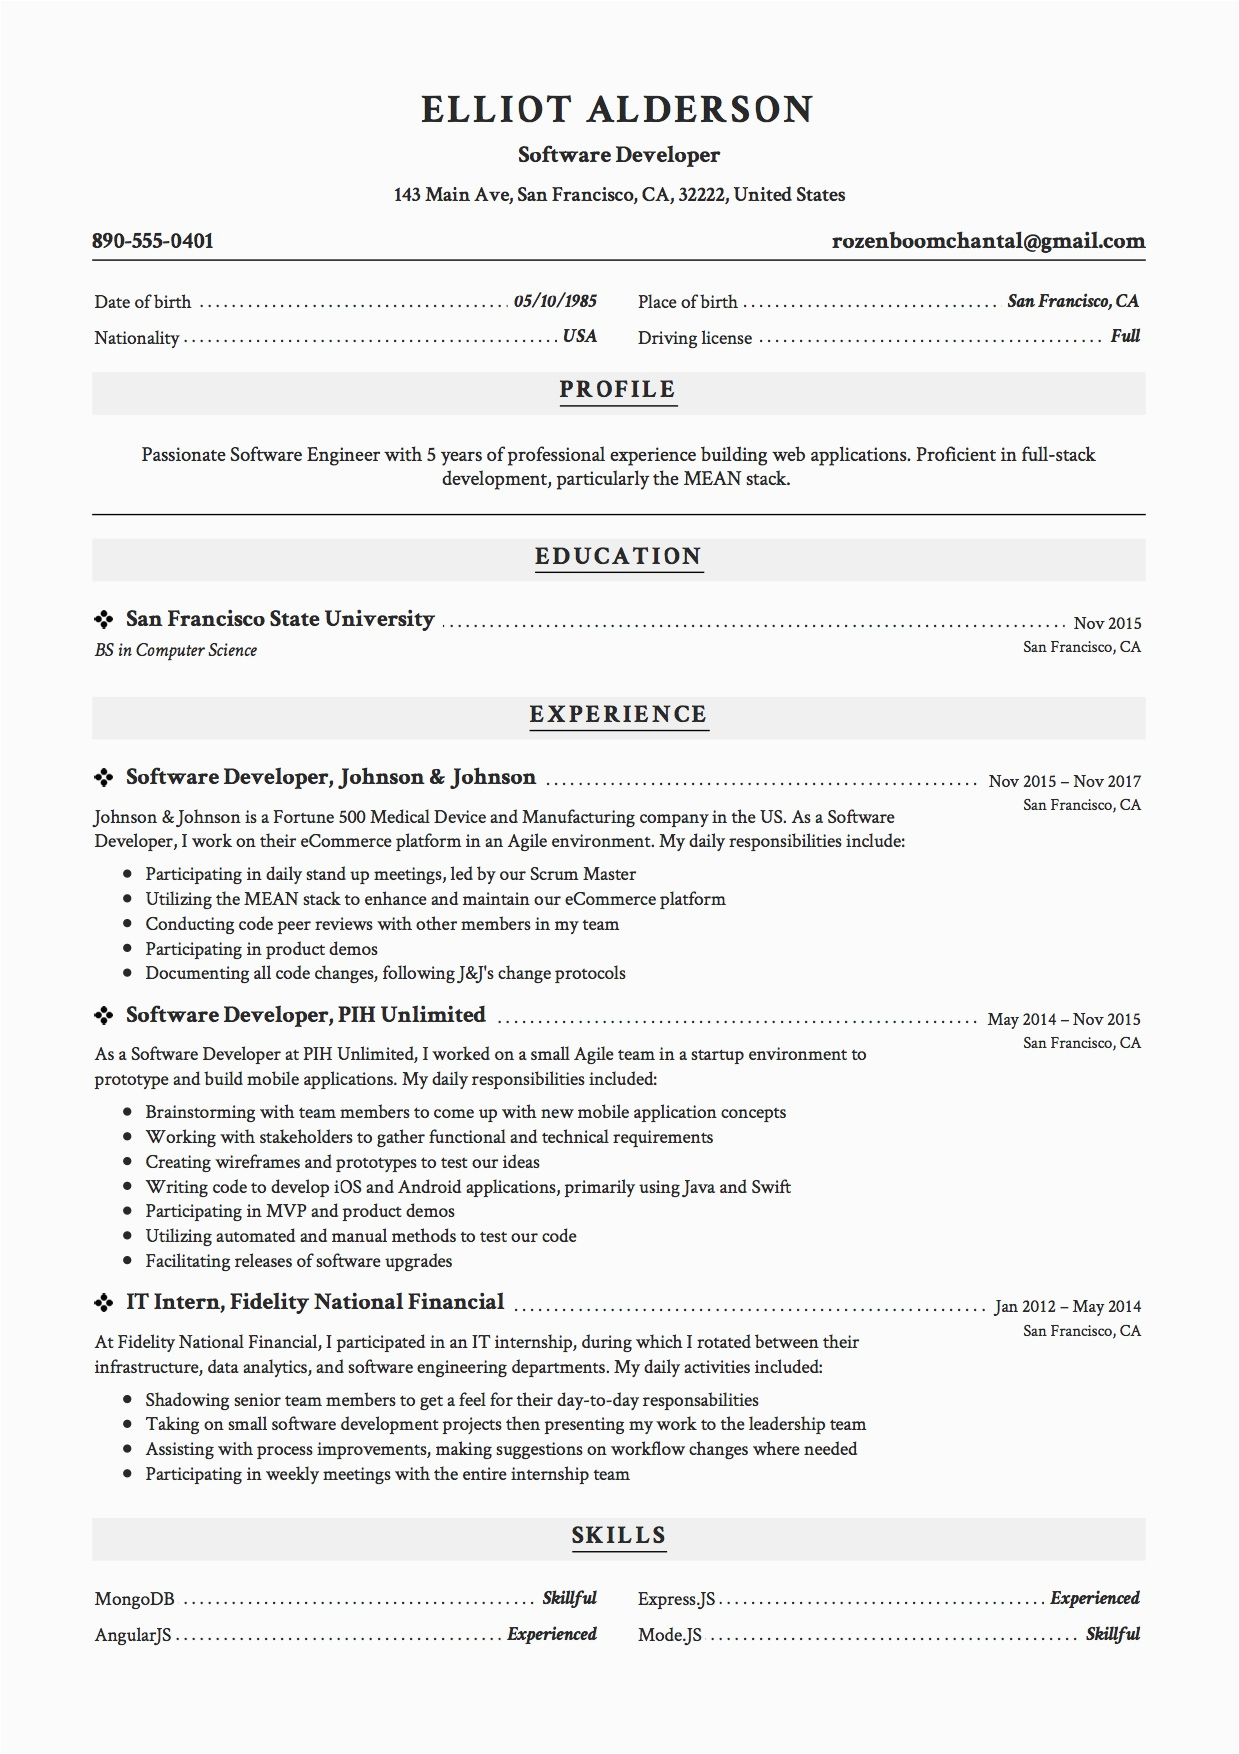 Sample Resume for 3 Years Experienced Mainframe Developer Sample Resume for software Engineer with 3 Years